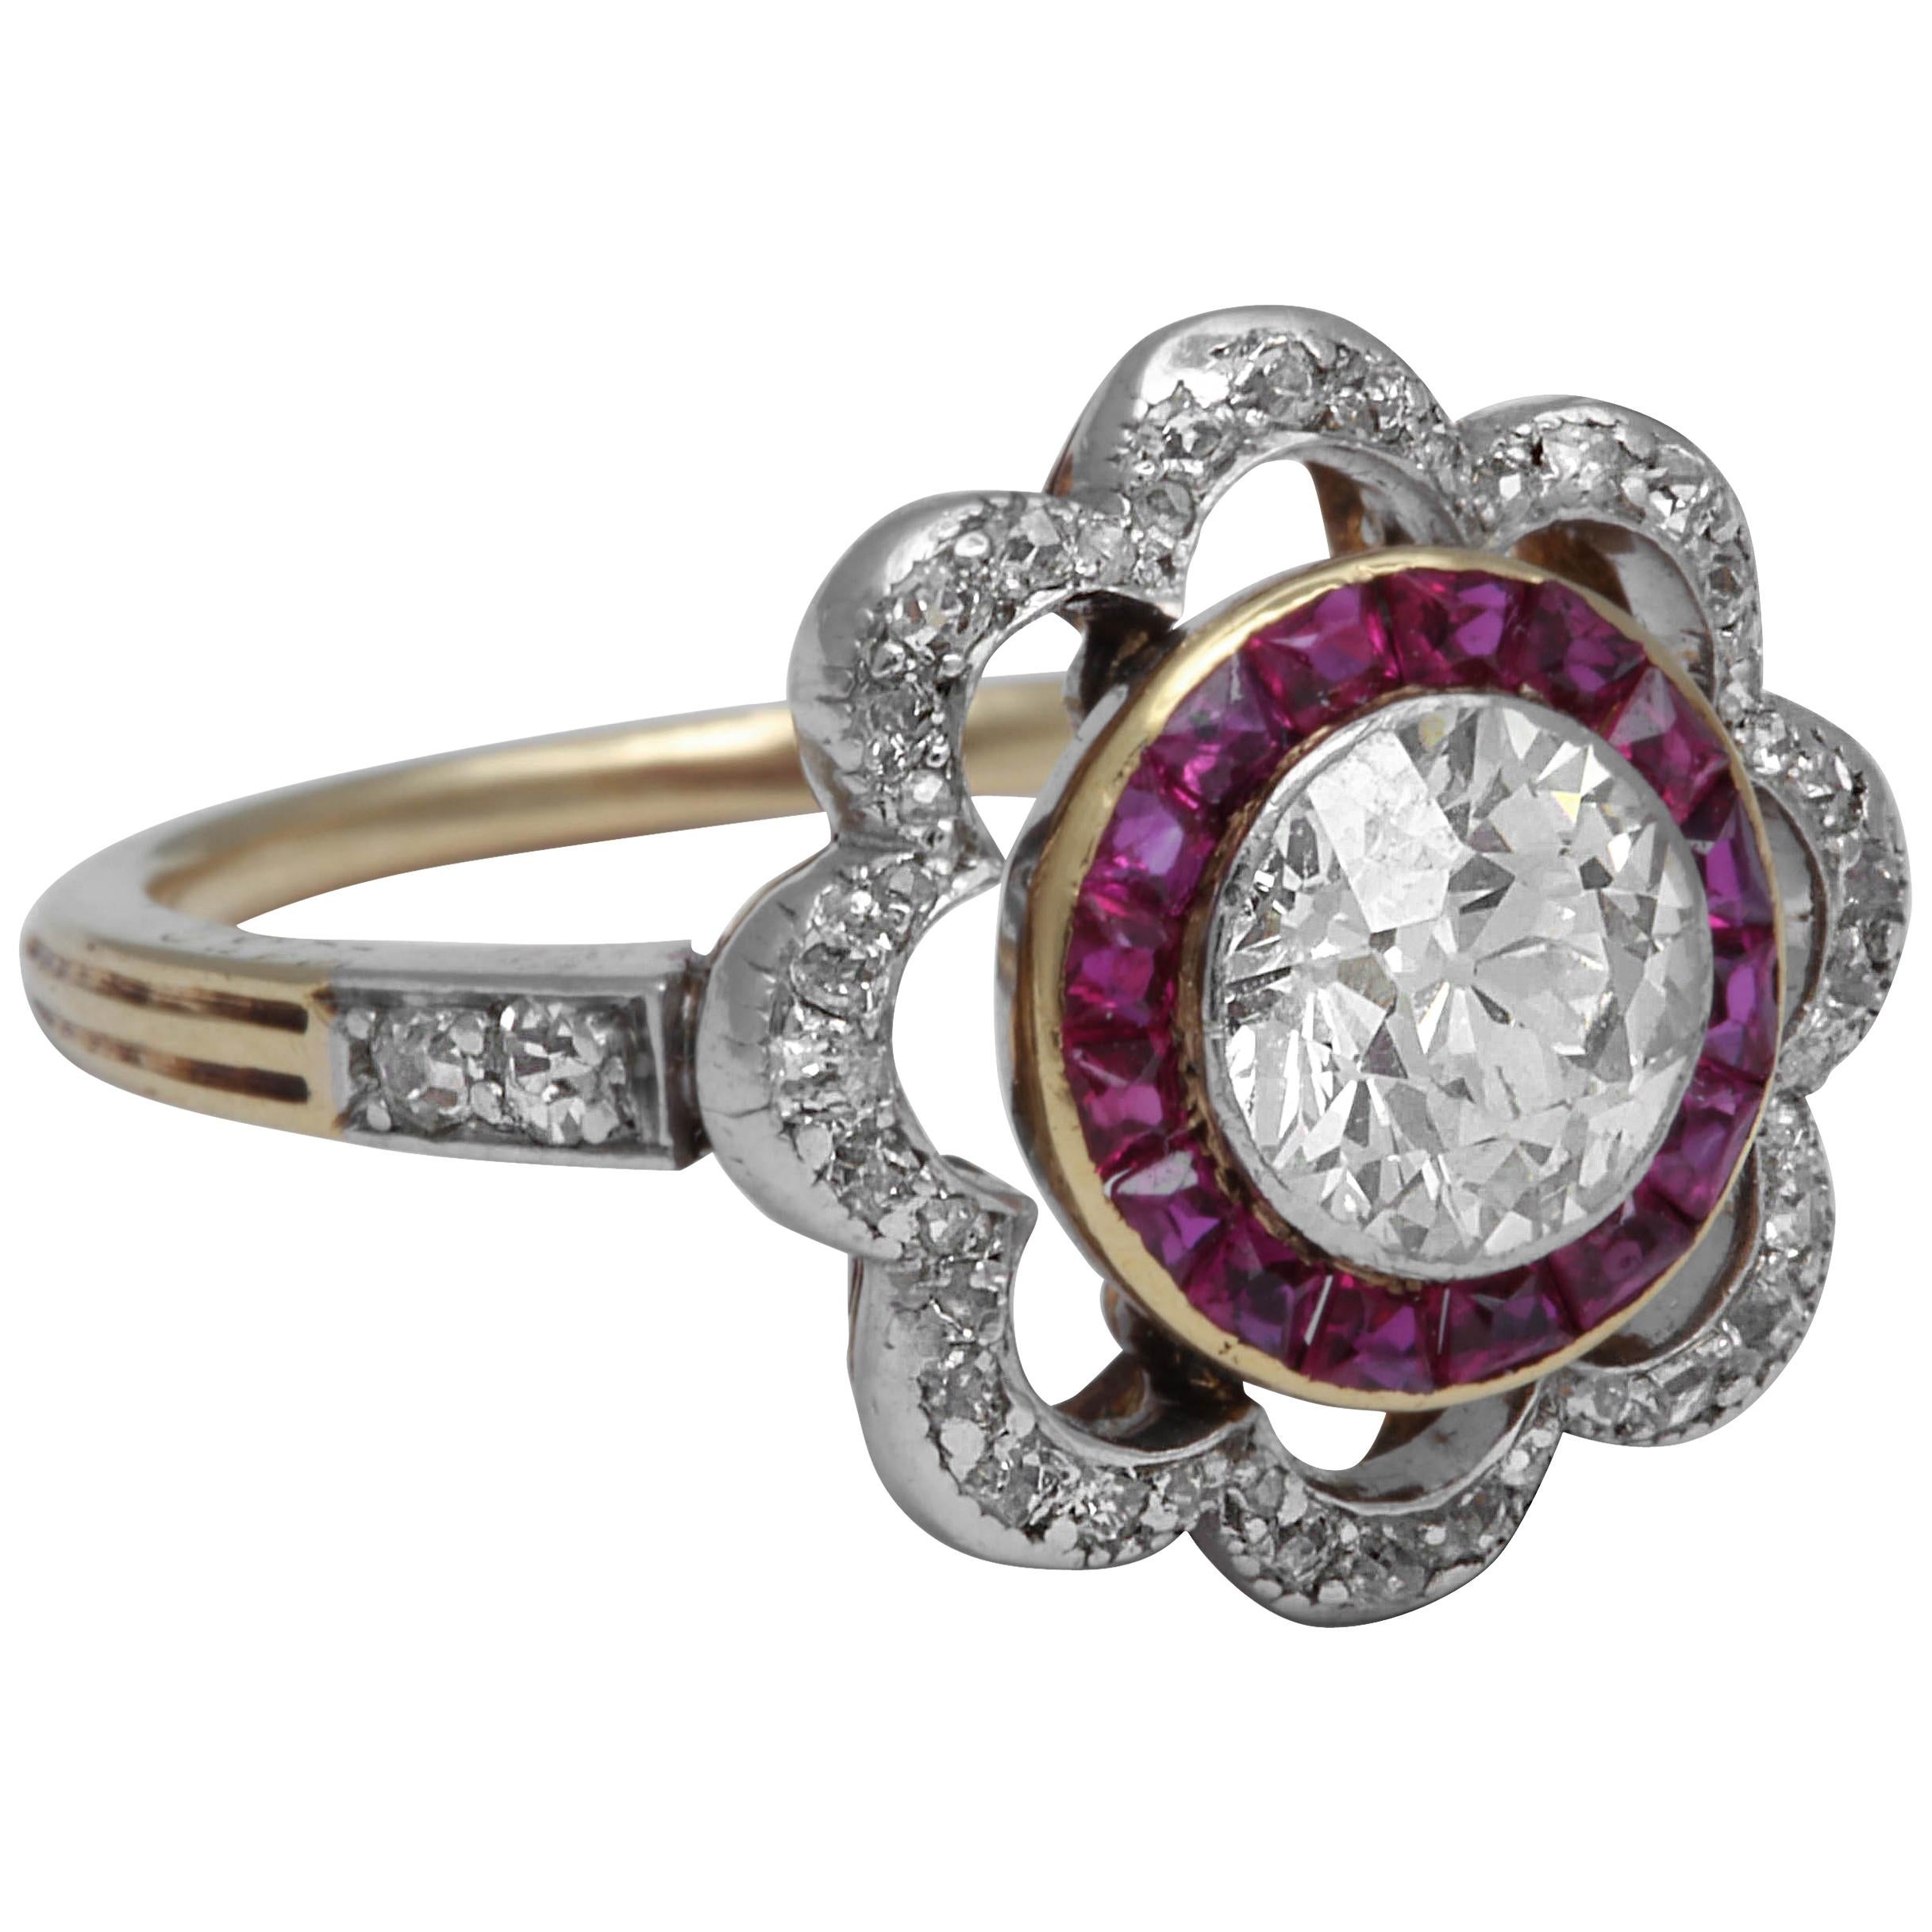 Turn of the Century Diamond and Ruby Ring